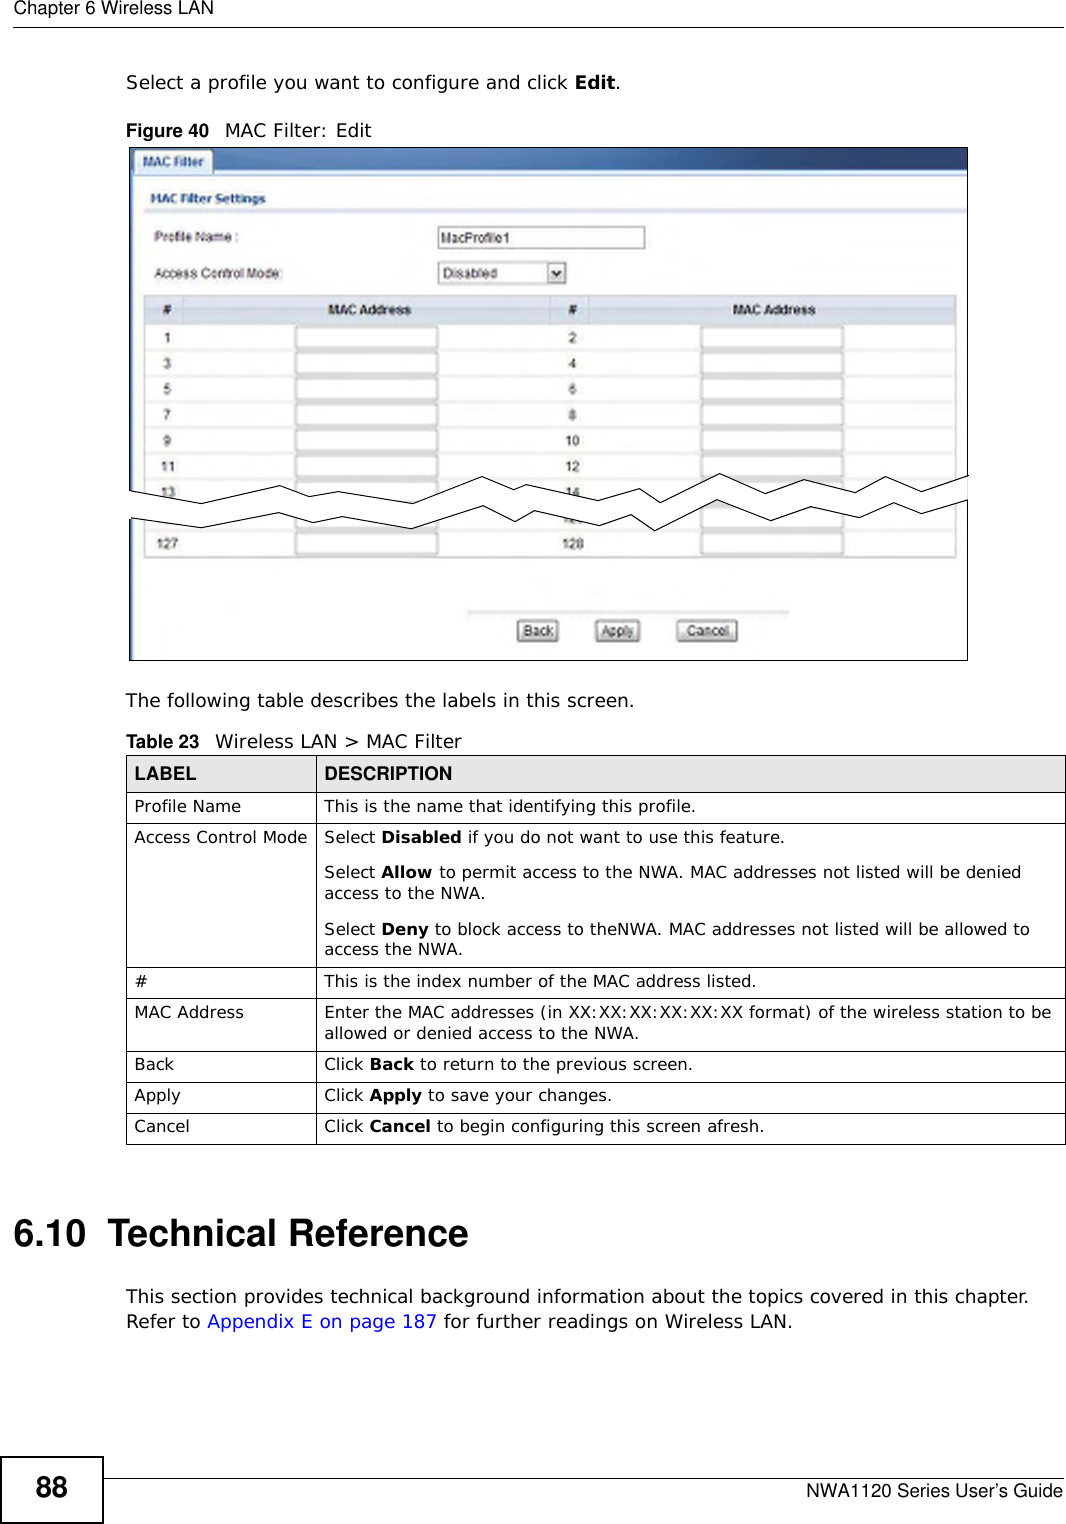 Chapter 6 Wireless LANNWA1120 Series User’s Guide88Select a profile you want to configure and click Edit. Figure 40   MAC Filter: EditThe following table describes the labels in this screen.6.10  Technical ReferenceThis section provides technical background information about the topics covered in this chapter. Refer to Appendix E on page 187 for further readings on Wireless LAN.Table 23   Wireless LAN &gt; MAC FilterLABEL DESCRIPTIONProfile Name This is the name that identifying this profile.Access Control Mode Select Disabled if you do not want to use this feature.Select Allow to permit access to the NWA. MAC addresses not listed will be denied access to the NWA.Select Deny to block access to theNWA. MAC addresses not listed will be allowed to access the NWA.#This is the index number of the MAC address listed.MAC Address Enter the MAC addresses (in XX:XX:XX:XX:XX:XX format) of the wireless station to be allowed or denied access to the NWA.Back Click Back to return to the previous screen.Apply Click Apply to save your changes.Cancel Click Cancel to begin configuring this screen afresh.